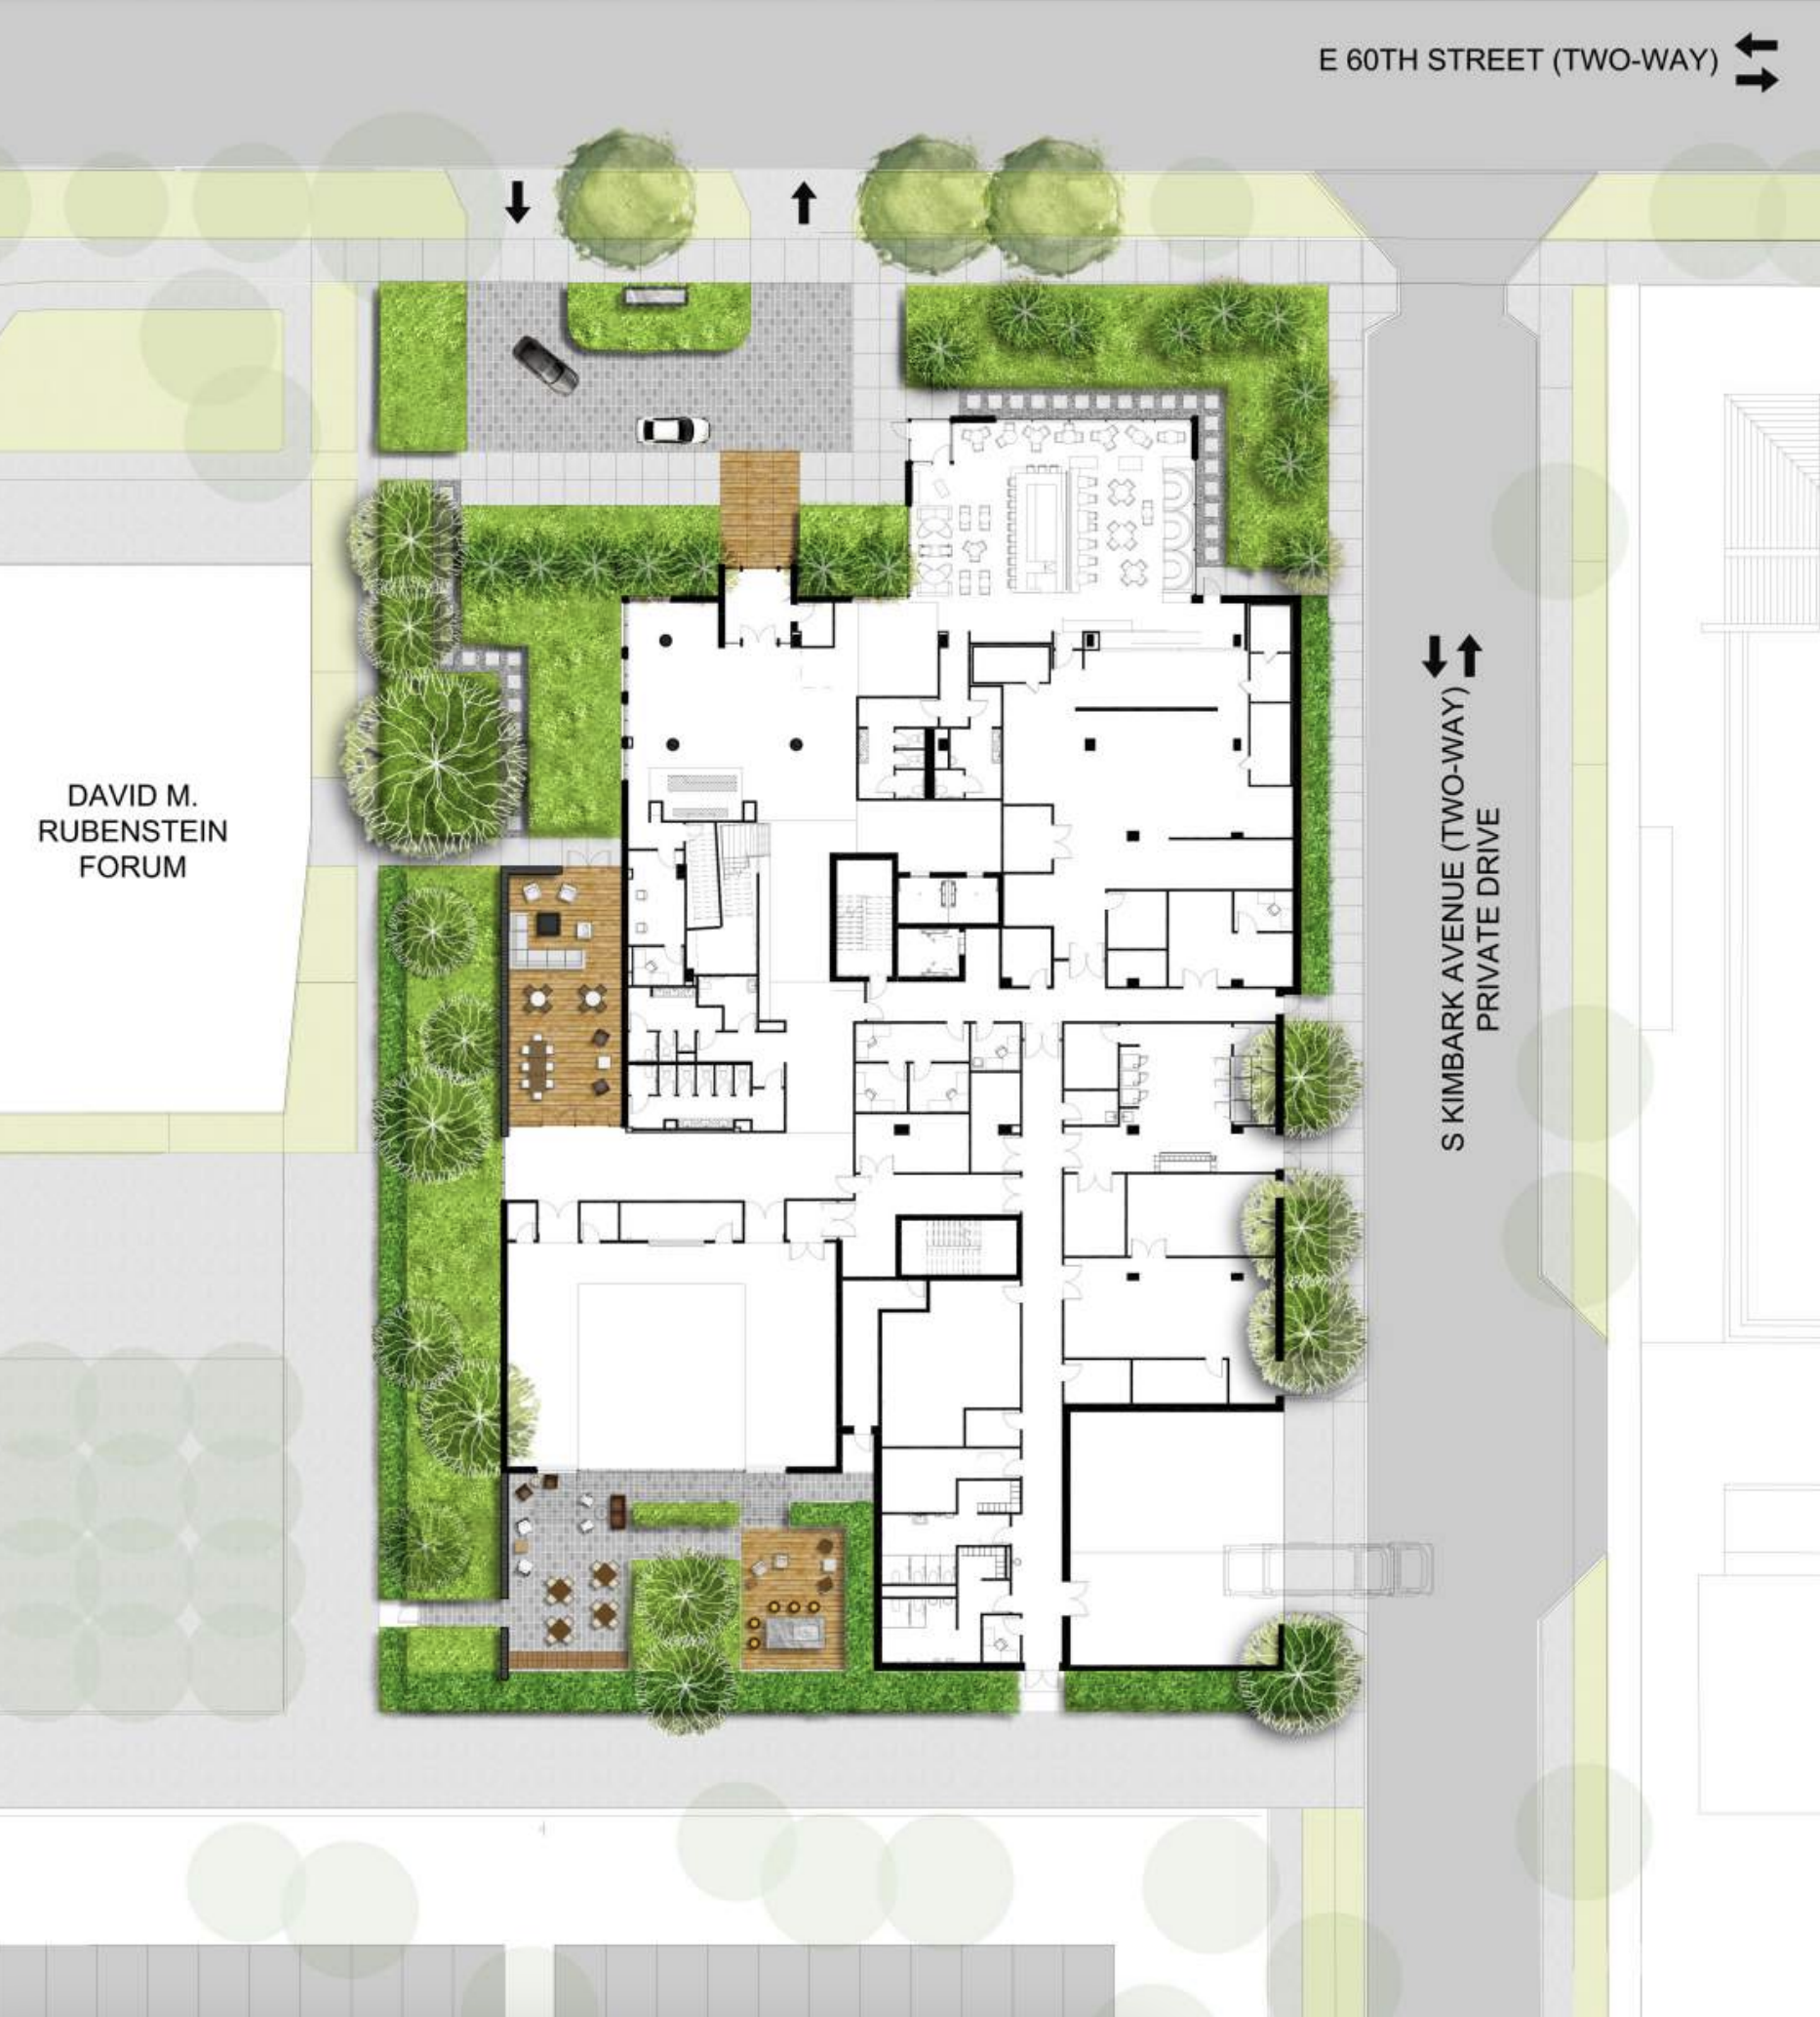 The Study at University of Chicago ground-floor plan